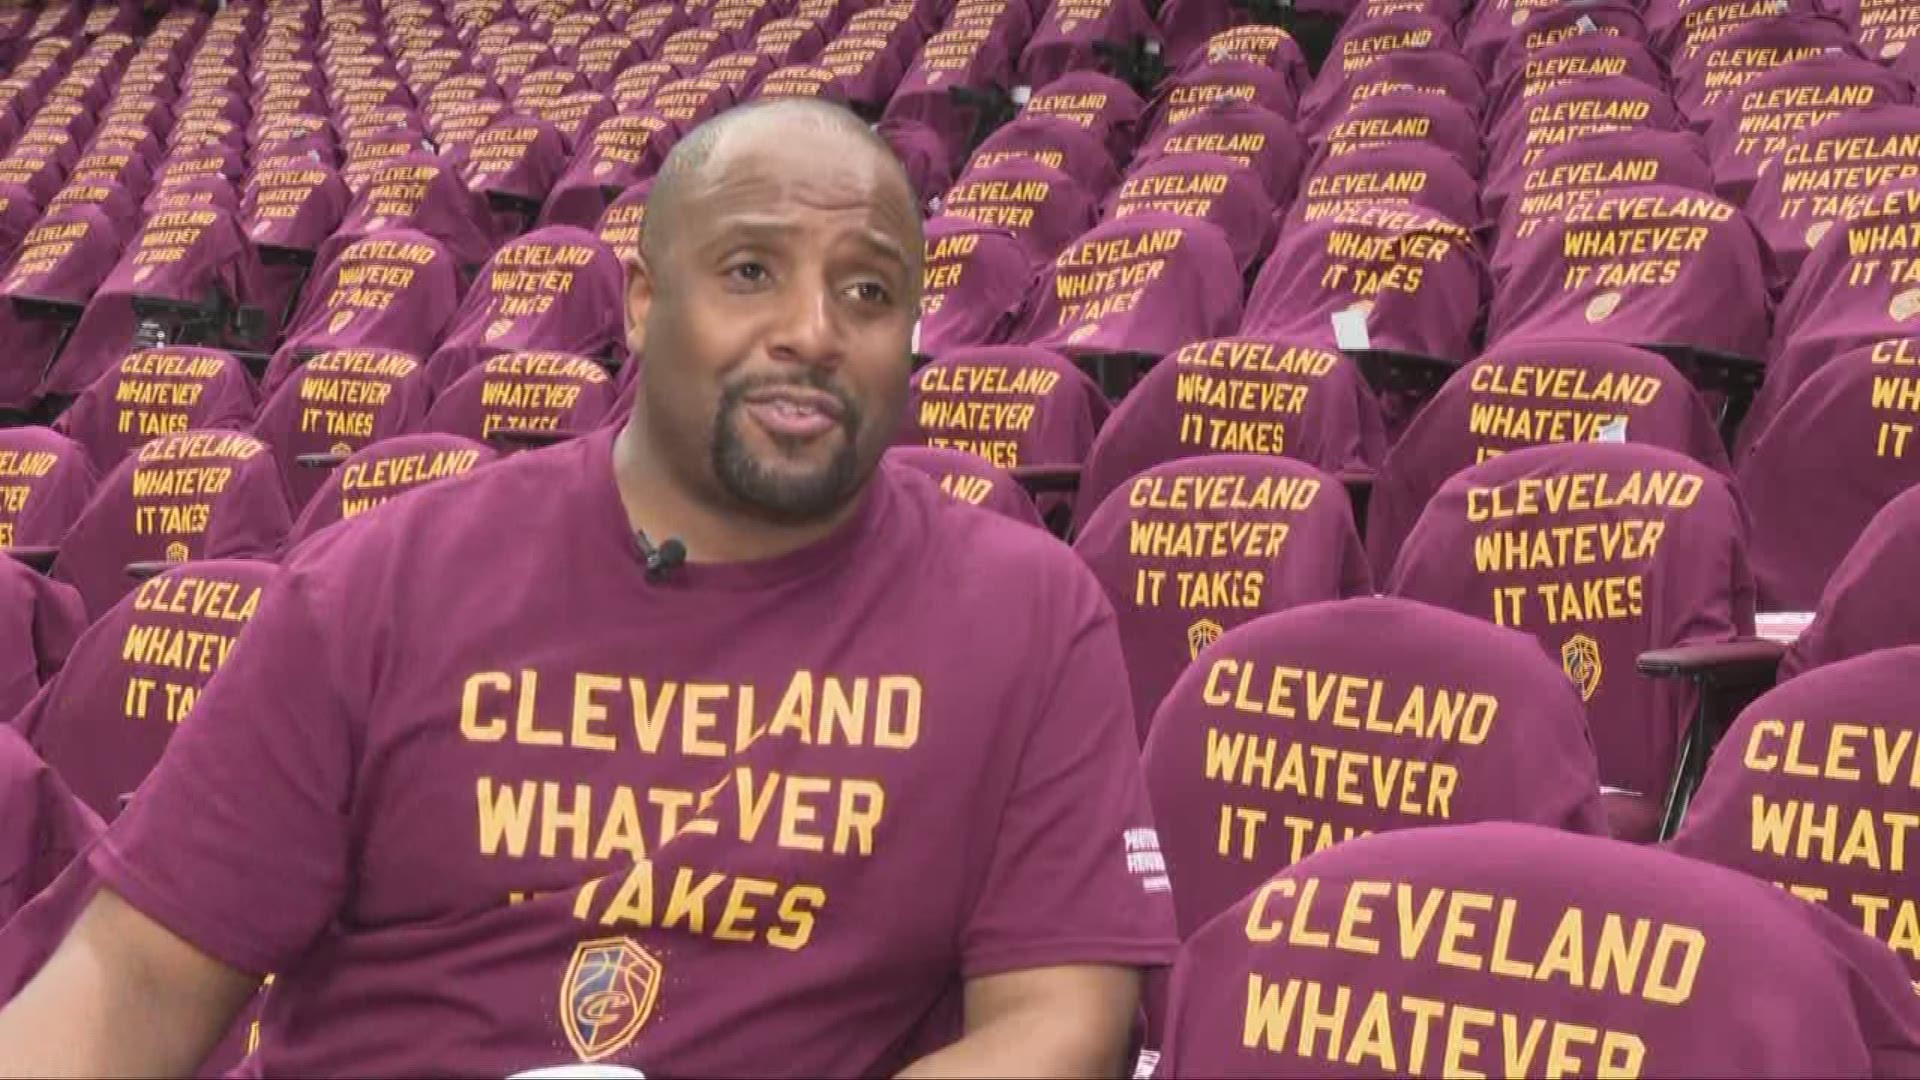 Cavs arena host going 13 years strong